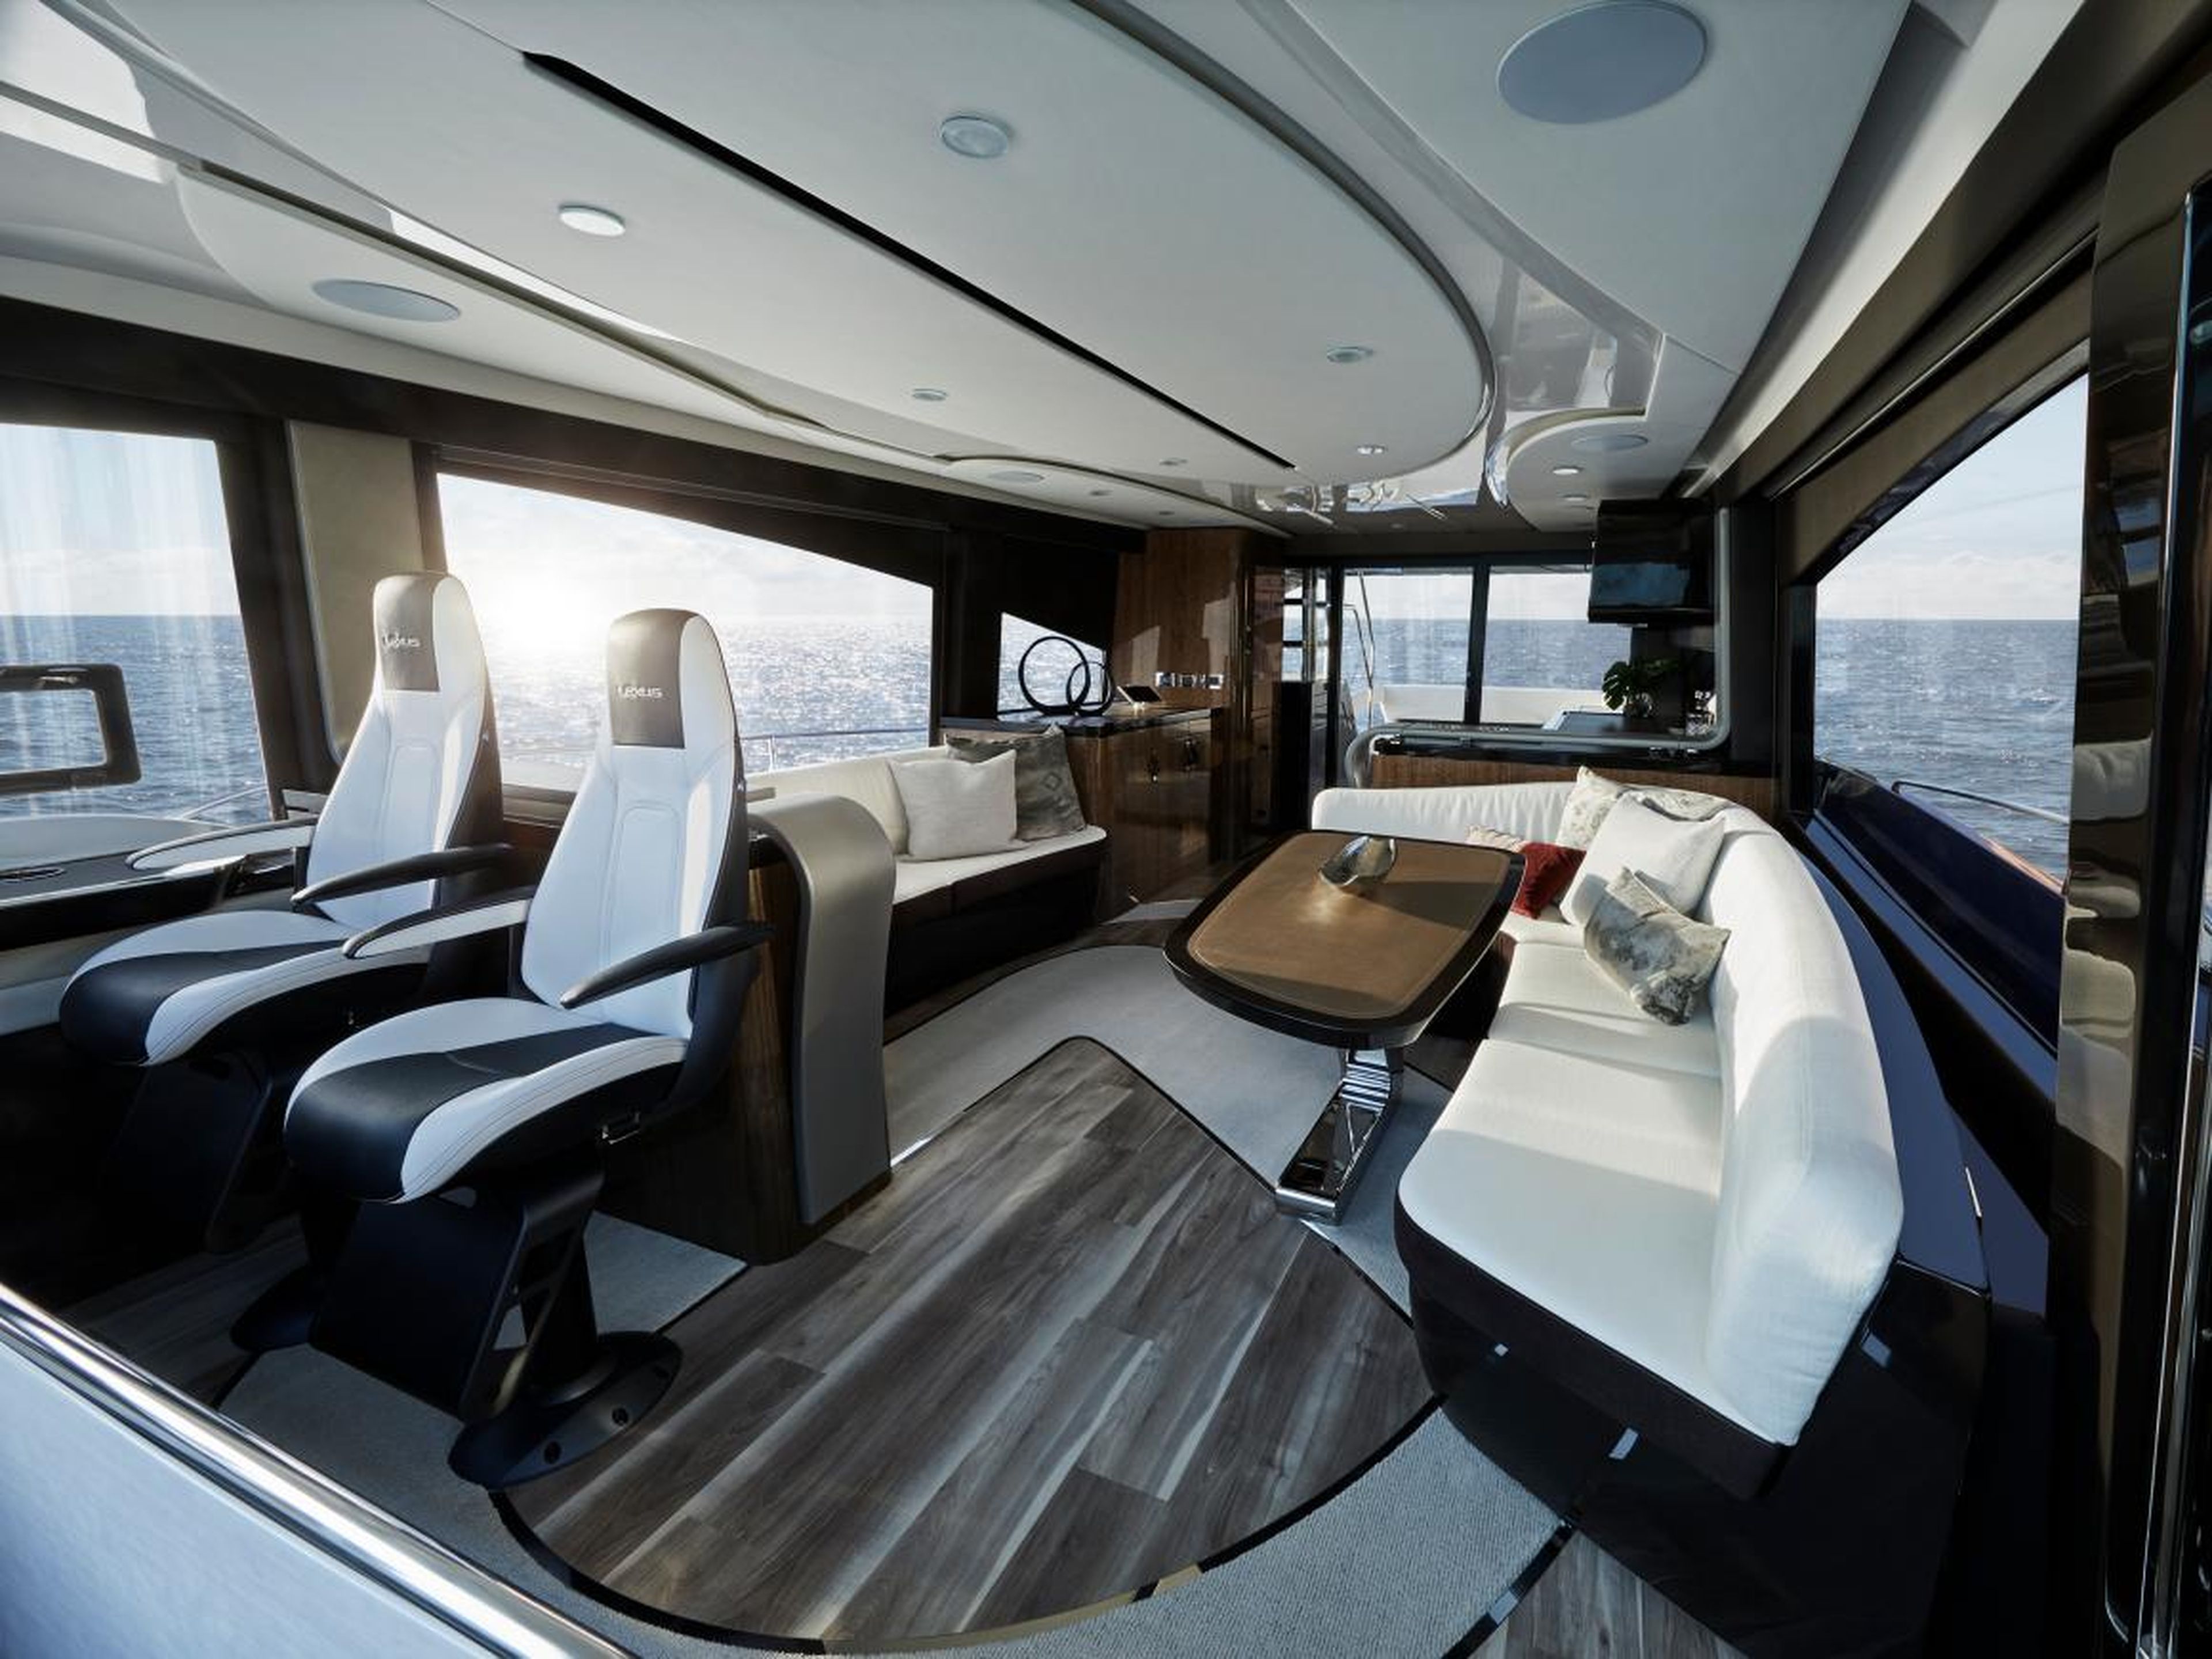 The interior has the brand's distinctive leather seating in white for the two captain seats and the sofas.